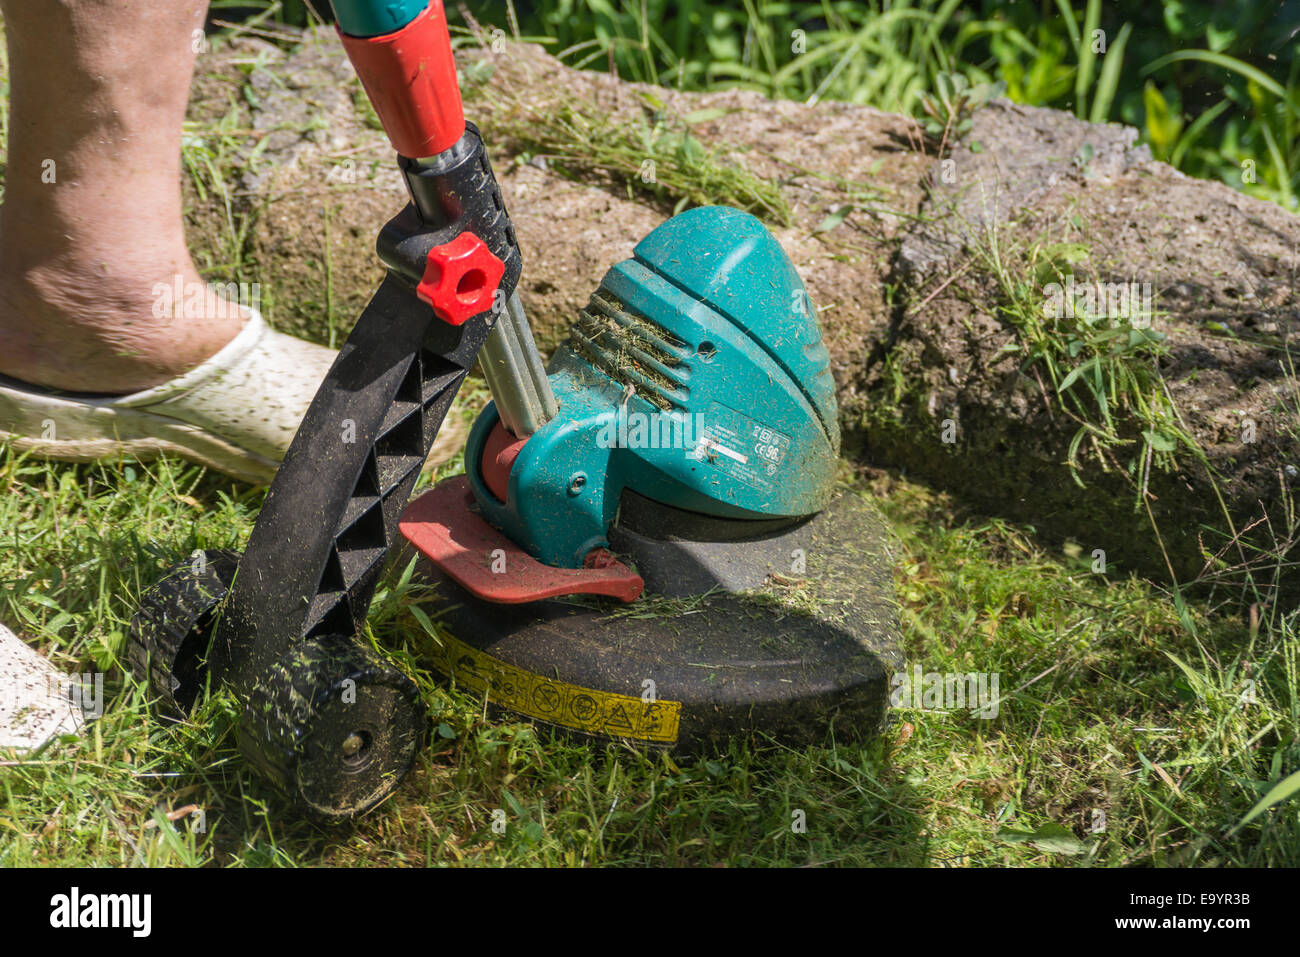 Man busy and concentrated trimming grass in the garden with brush cutter Stock Photo